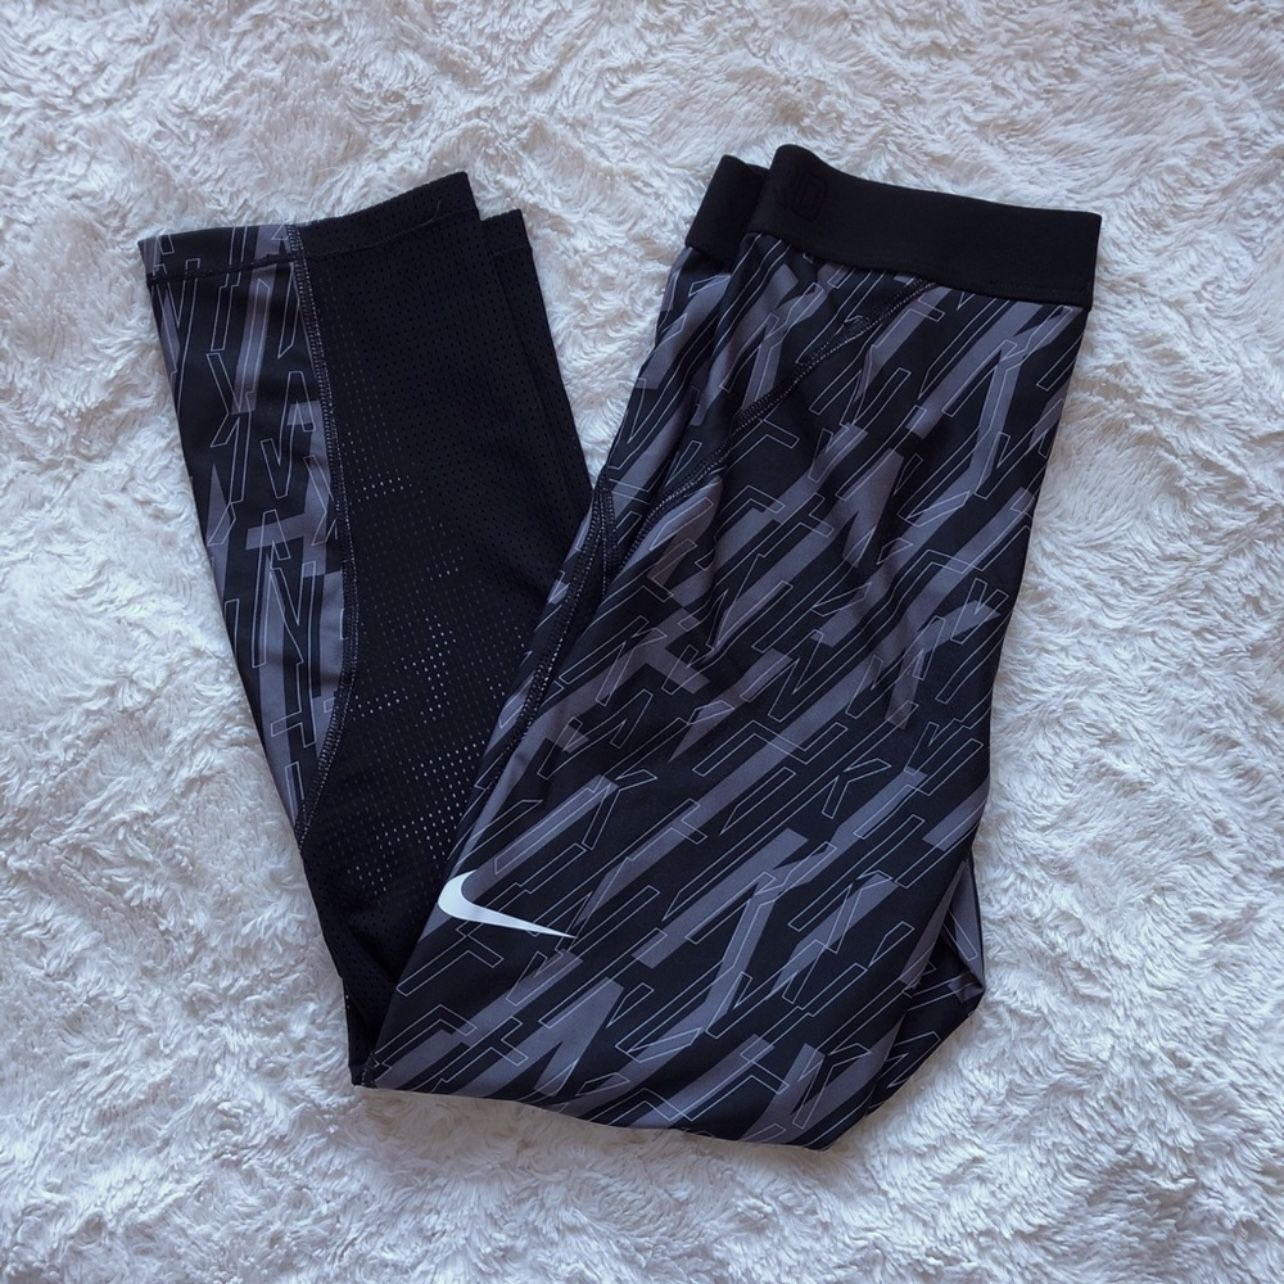 NIKE Graphic Print Grey Black HyperCool High Waisted Athletic Workout Leggings